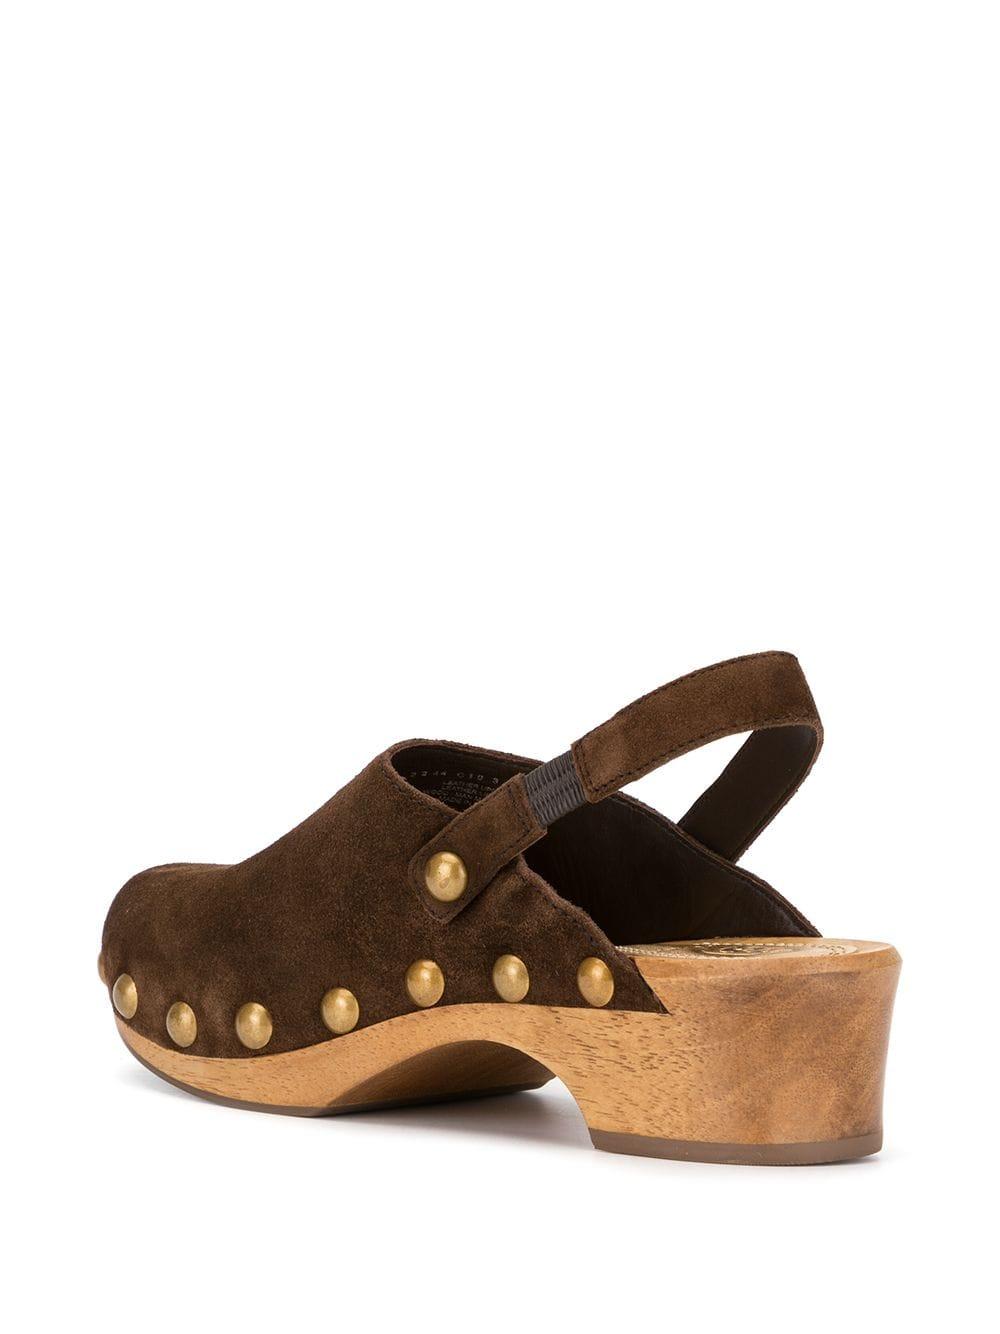 Tory Burch Blythe Studded Clogs in Brown | Lyst